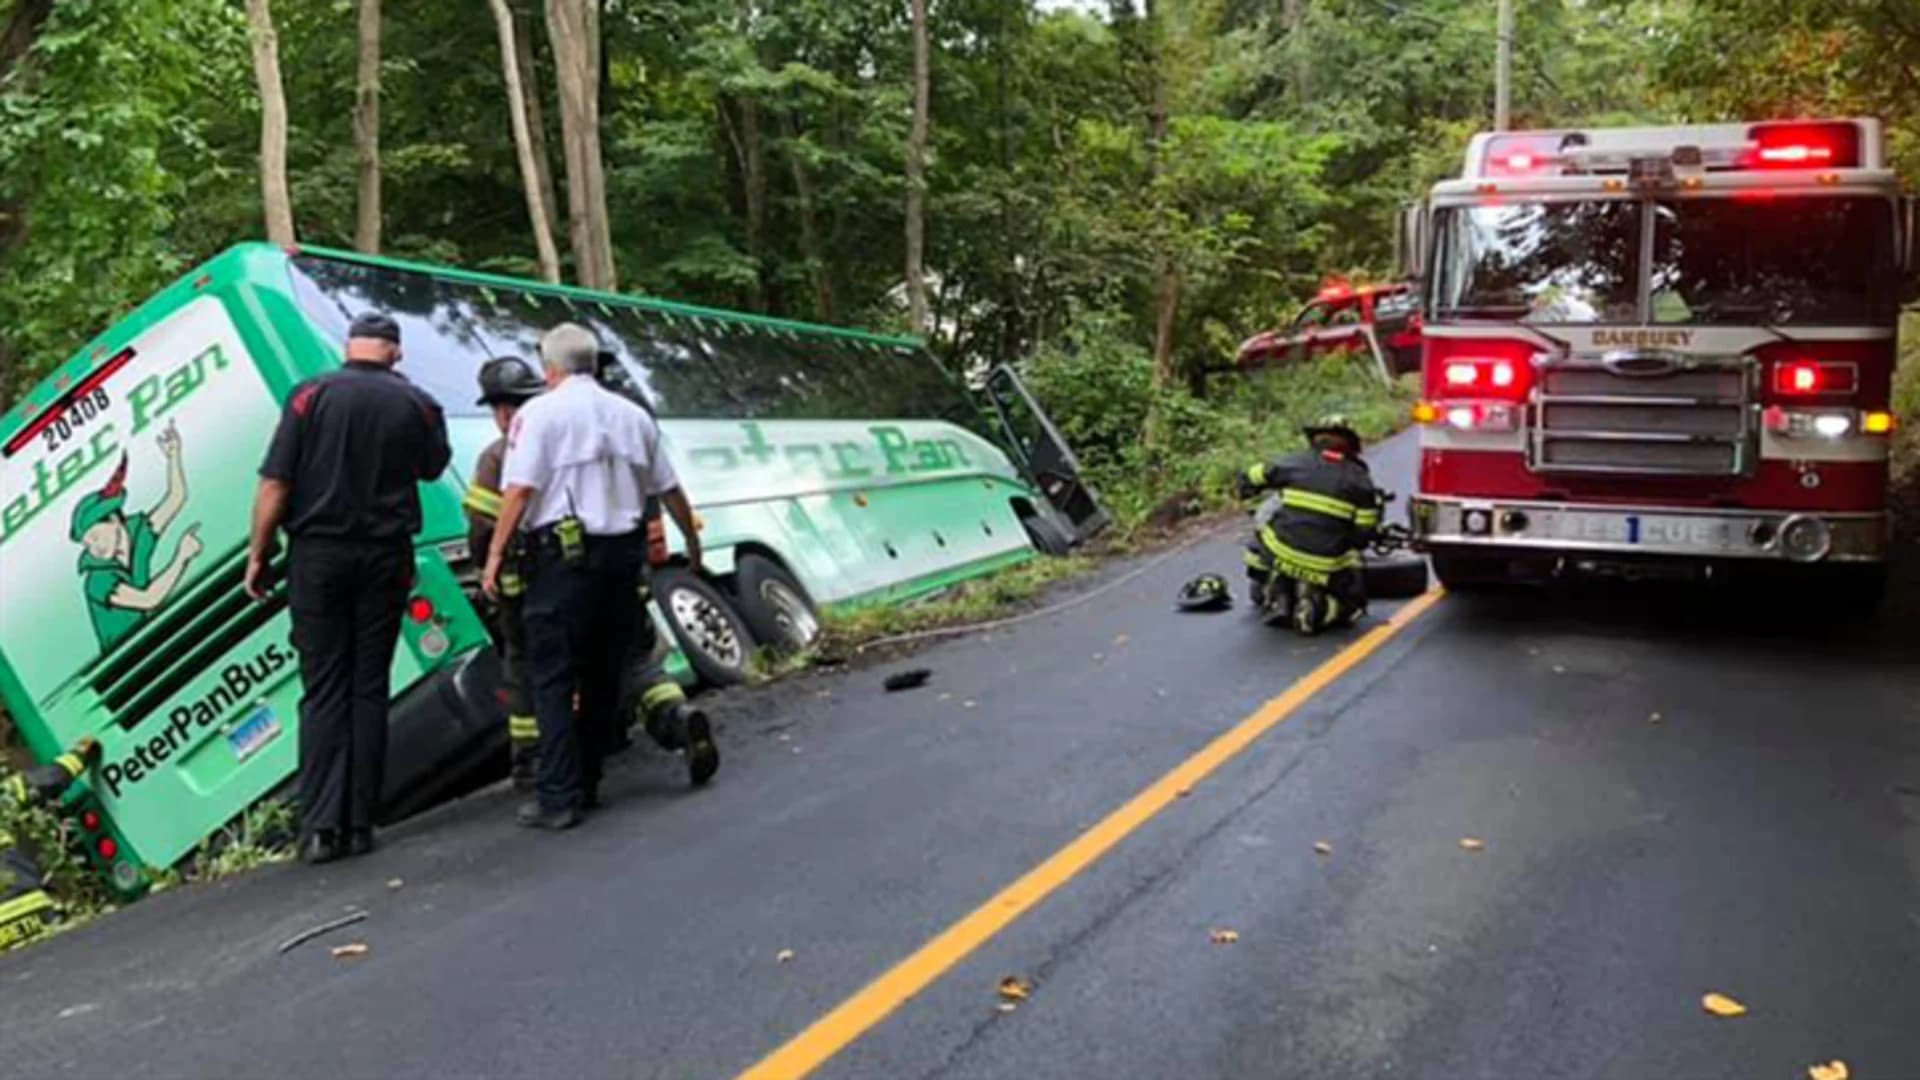 Officials: Bus goes off road in Danbury, closes street